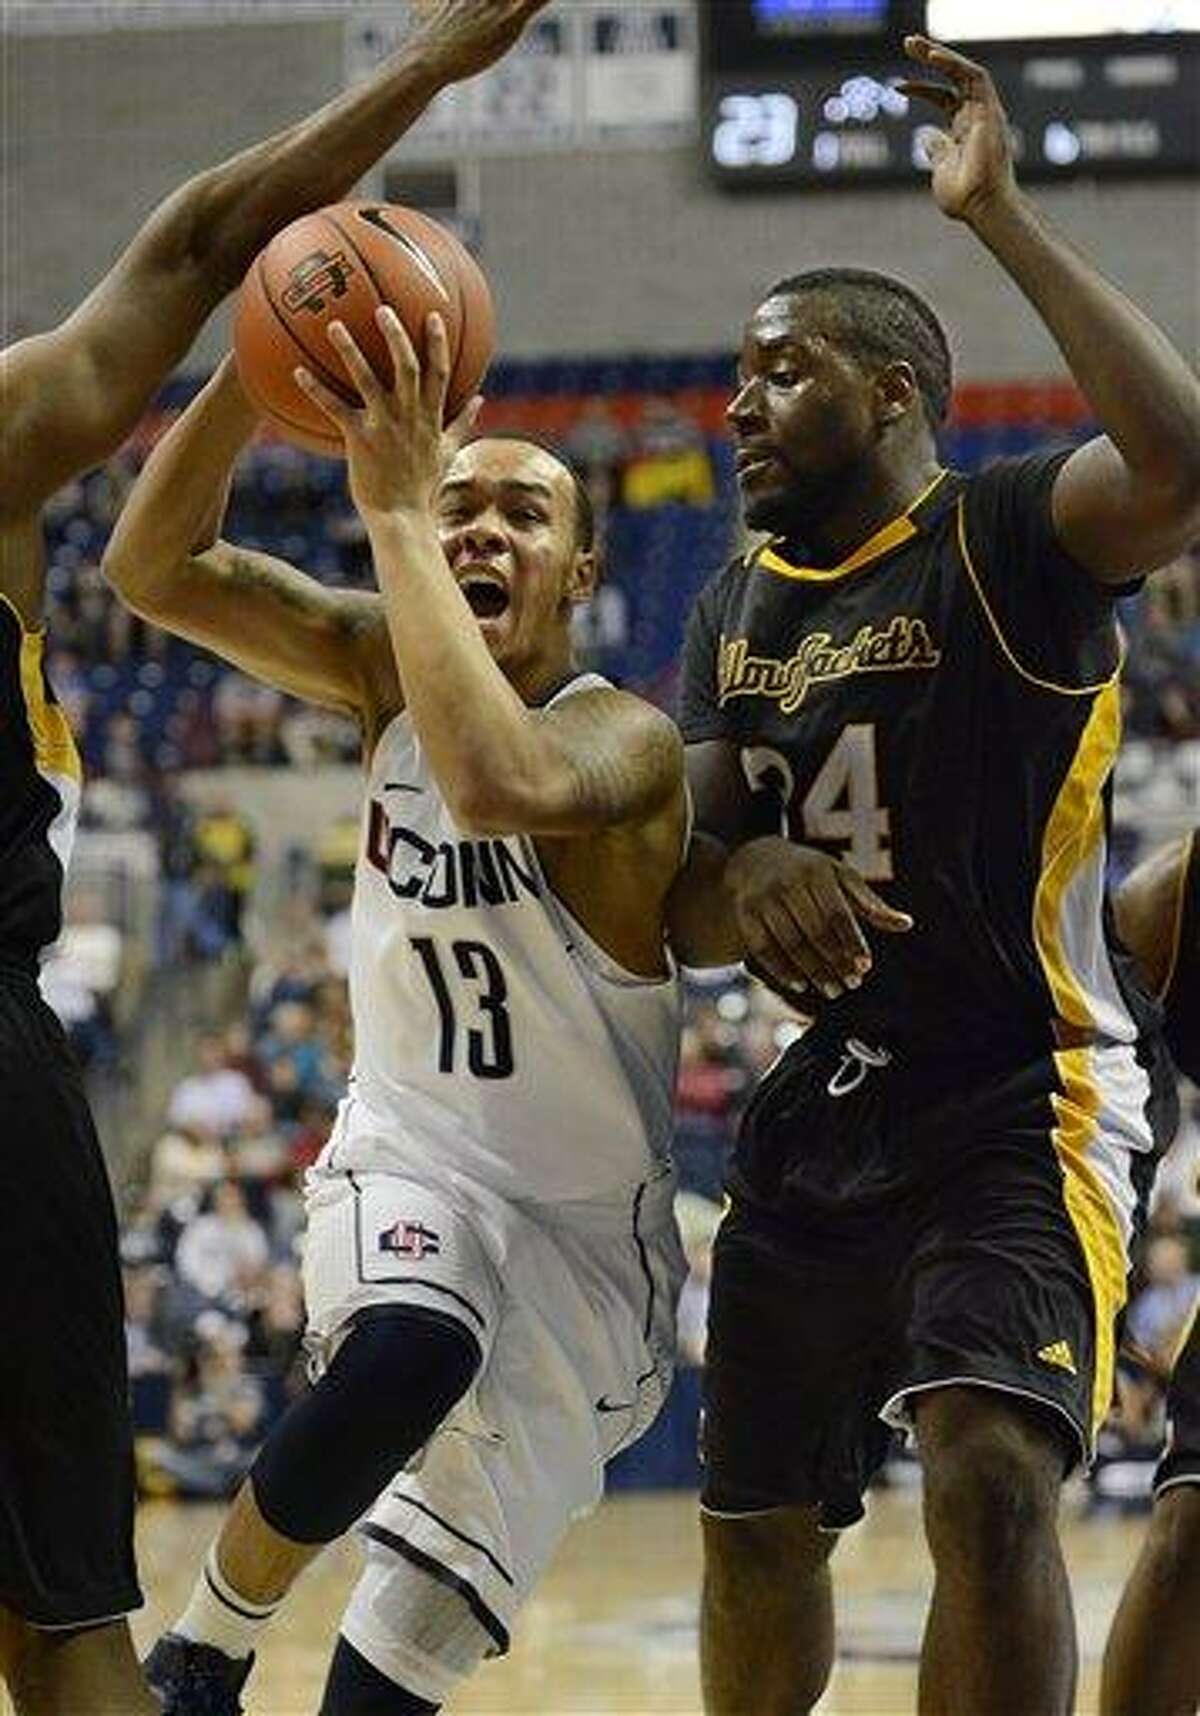 Connecticut Shabazz Napier (13) drives to the basket while guarded by American International College's David Campbell (34) during the first half of a men's NCAA basketball game in Storrs, Conn., Thursday, Nov. 1, 2012. (AP Photo/Jessica Hill)